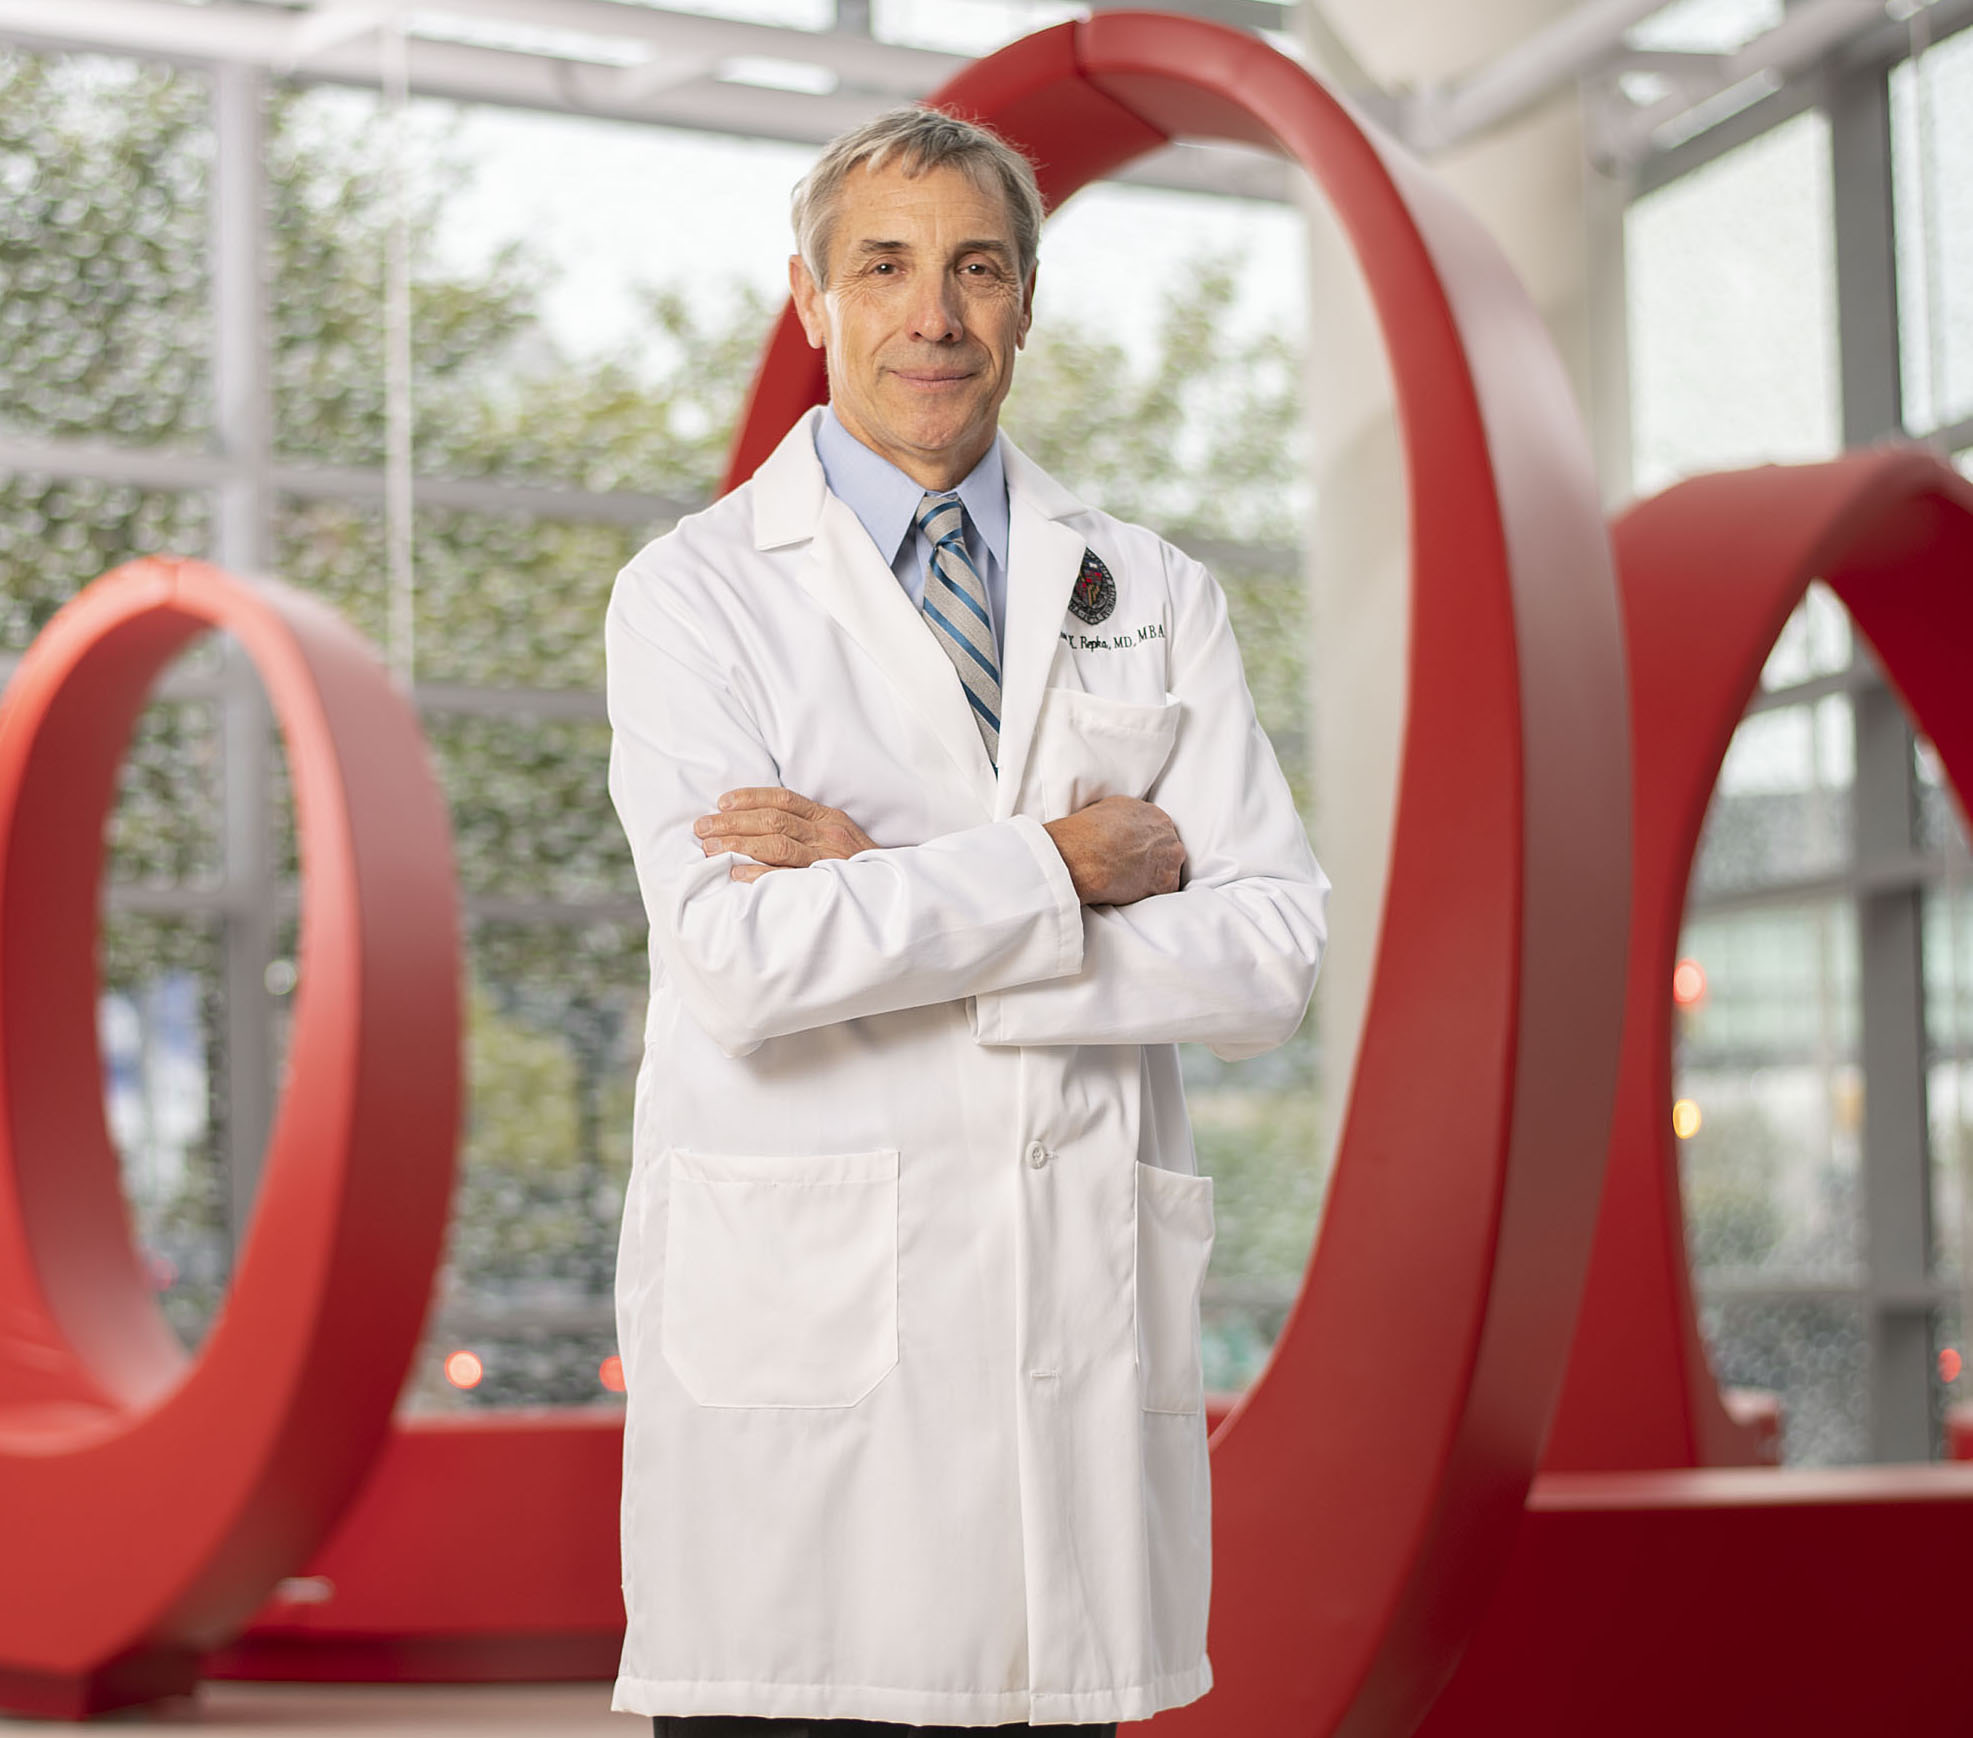 Dr. Michael Repka stands in the Johns Hopkins Children's Center.